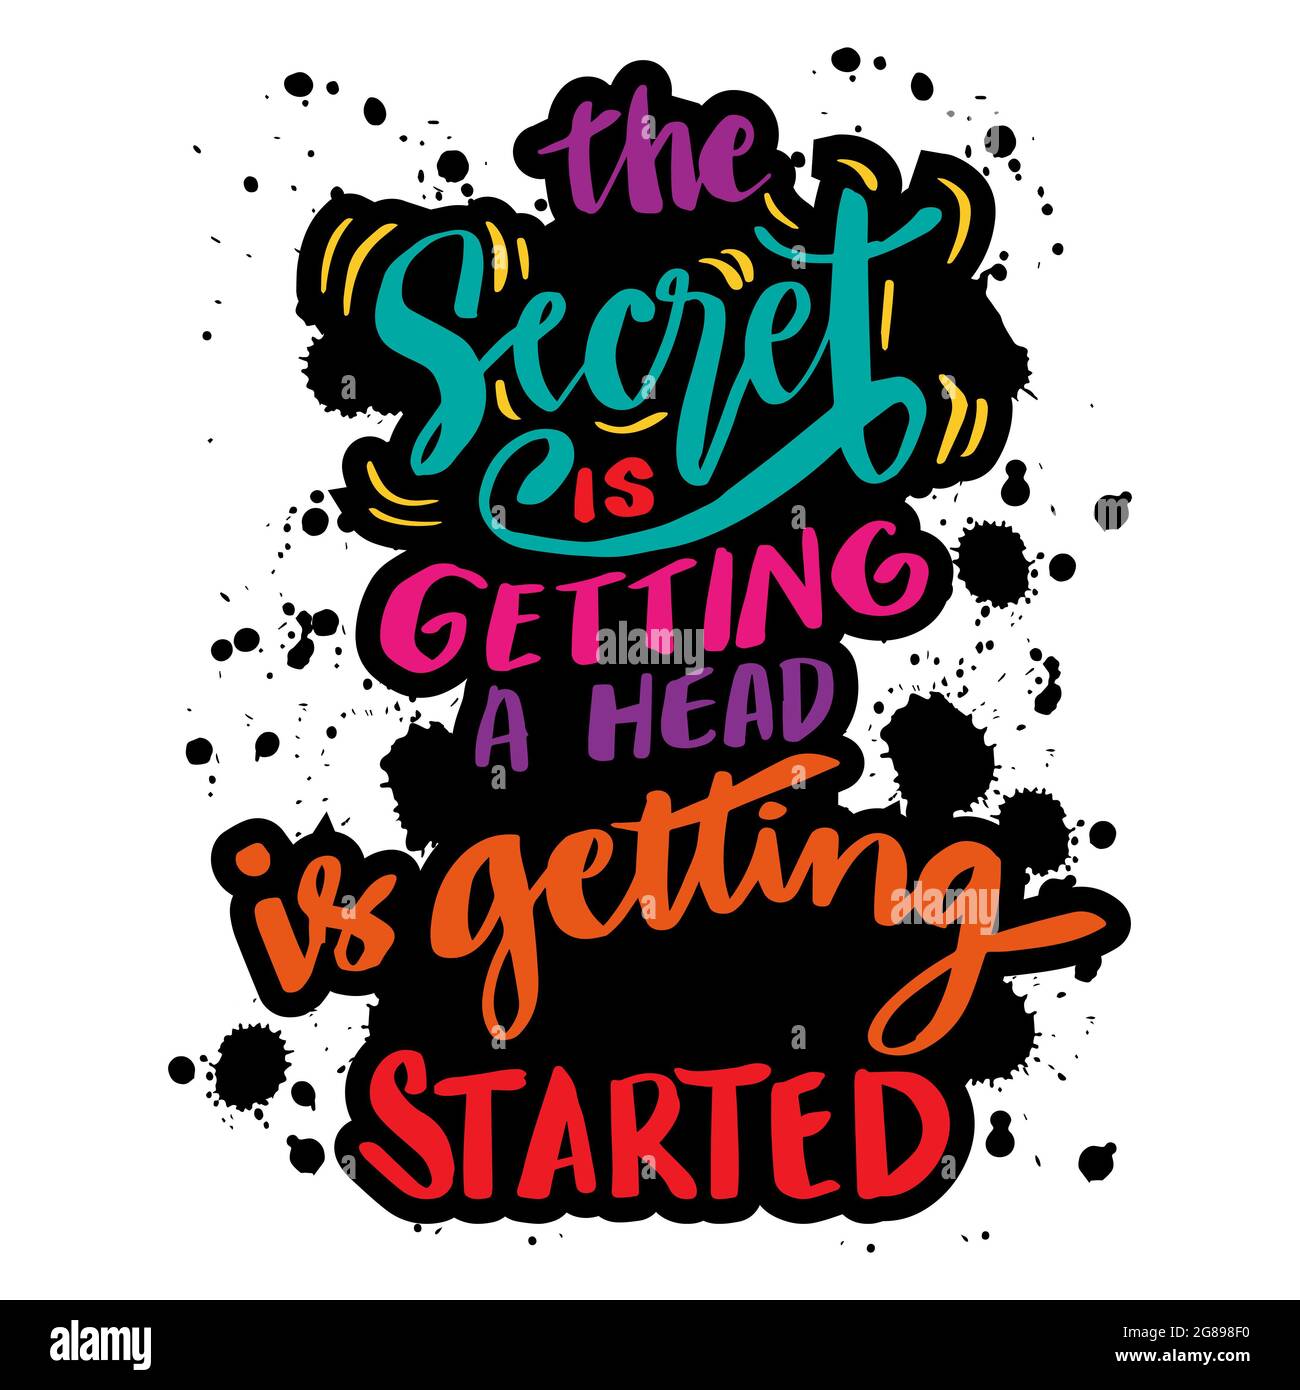 https://c8.alamy.com/comp/2G898F0/the-secret-of-getting-a-head-is-getting-started-hand-lettering-inspirational-and-motivation-quote-2G898F0.jpg